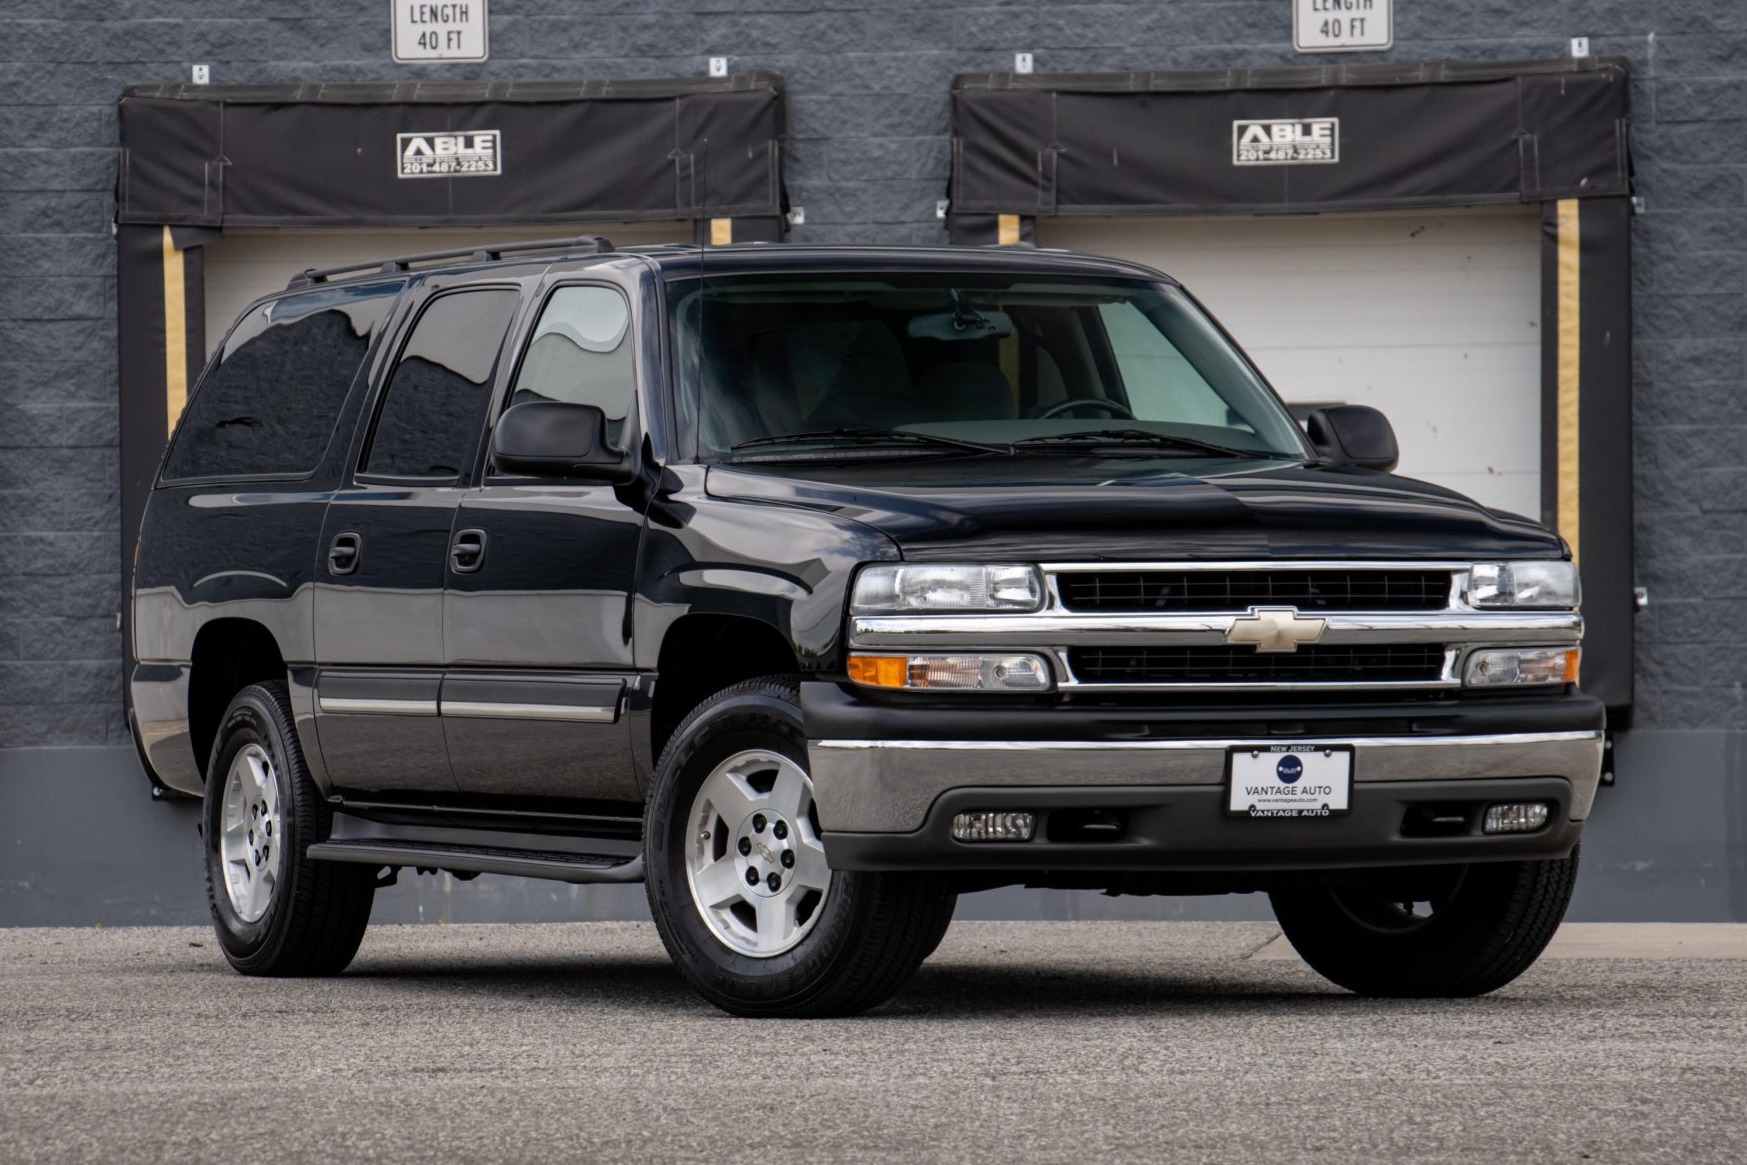 Used 13k-Mile 2004 Chevrolet Suburban 1500 LS 4×4 Review